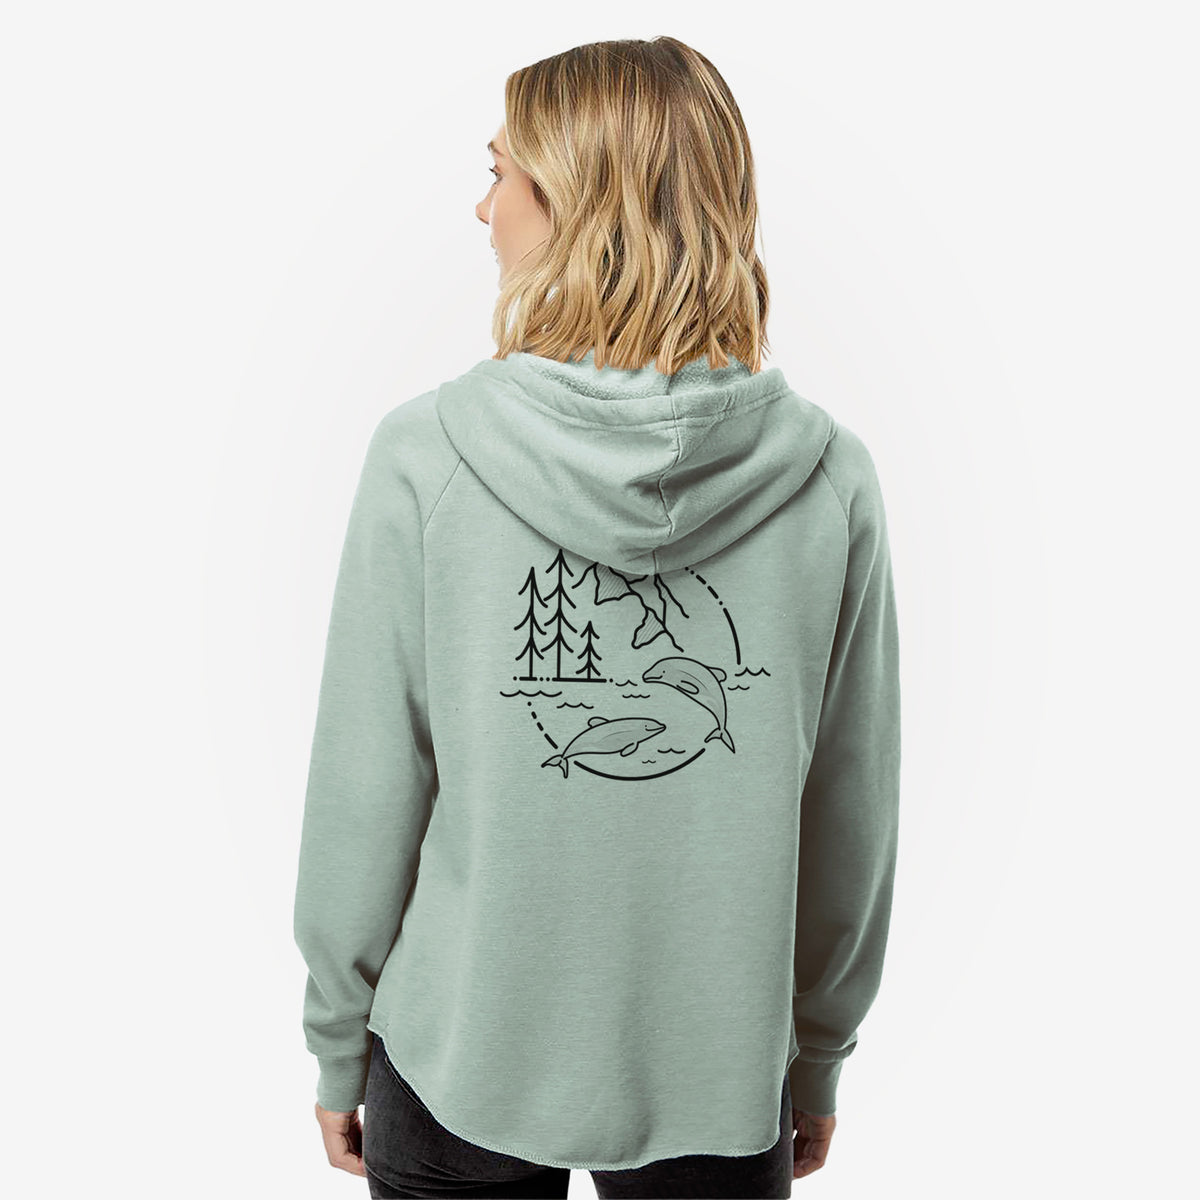 It&#39;s All Connected - Maui Dolphins - Women&#39;s Cali Wave Zip-Up Sweatshirt